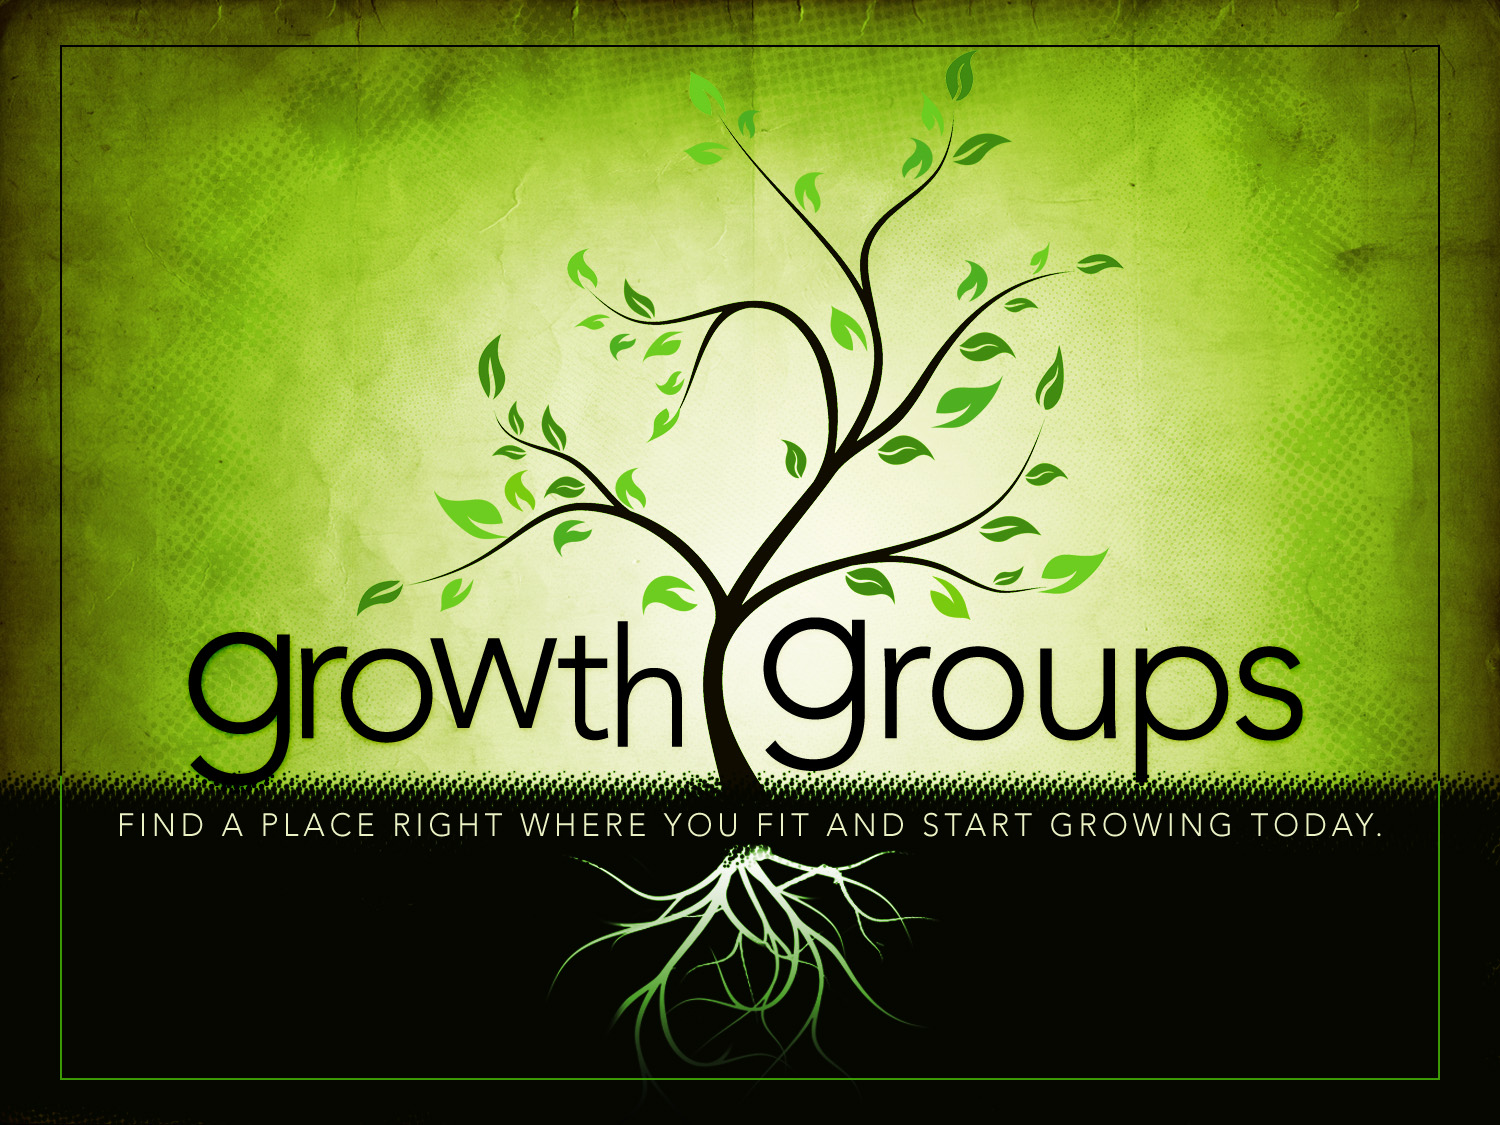 Growth Groups 2.0